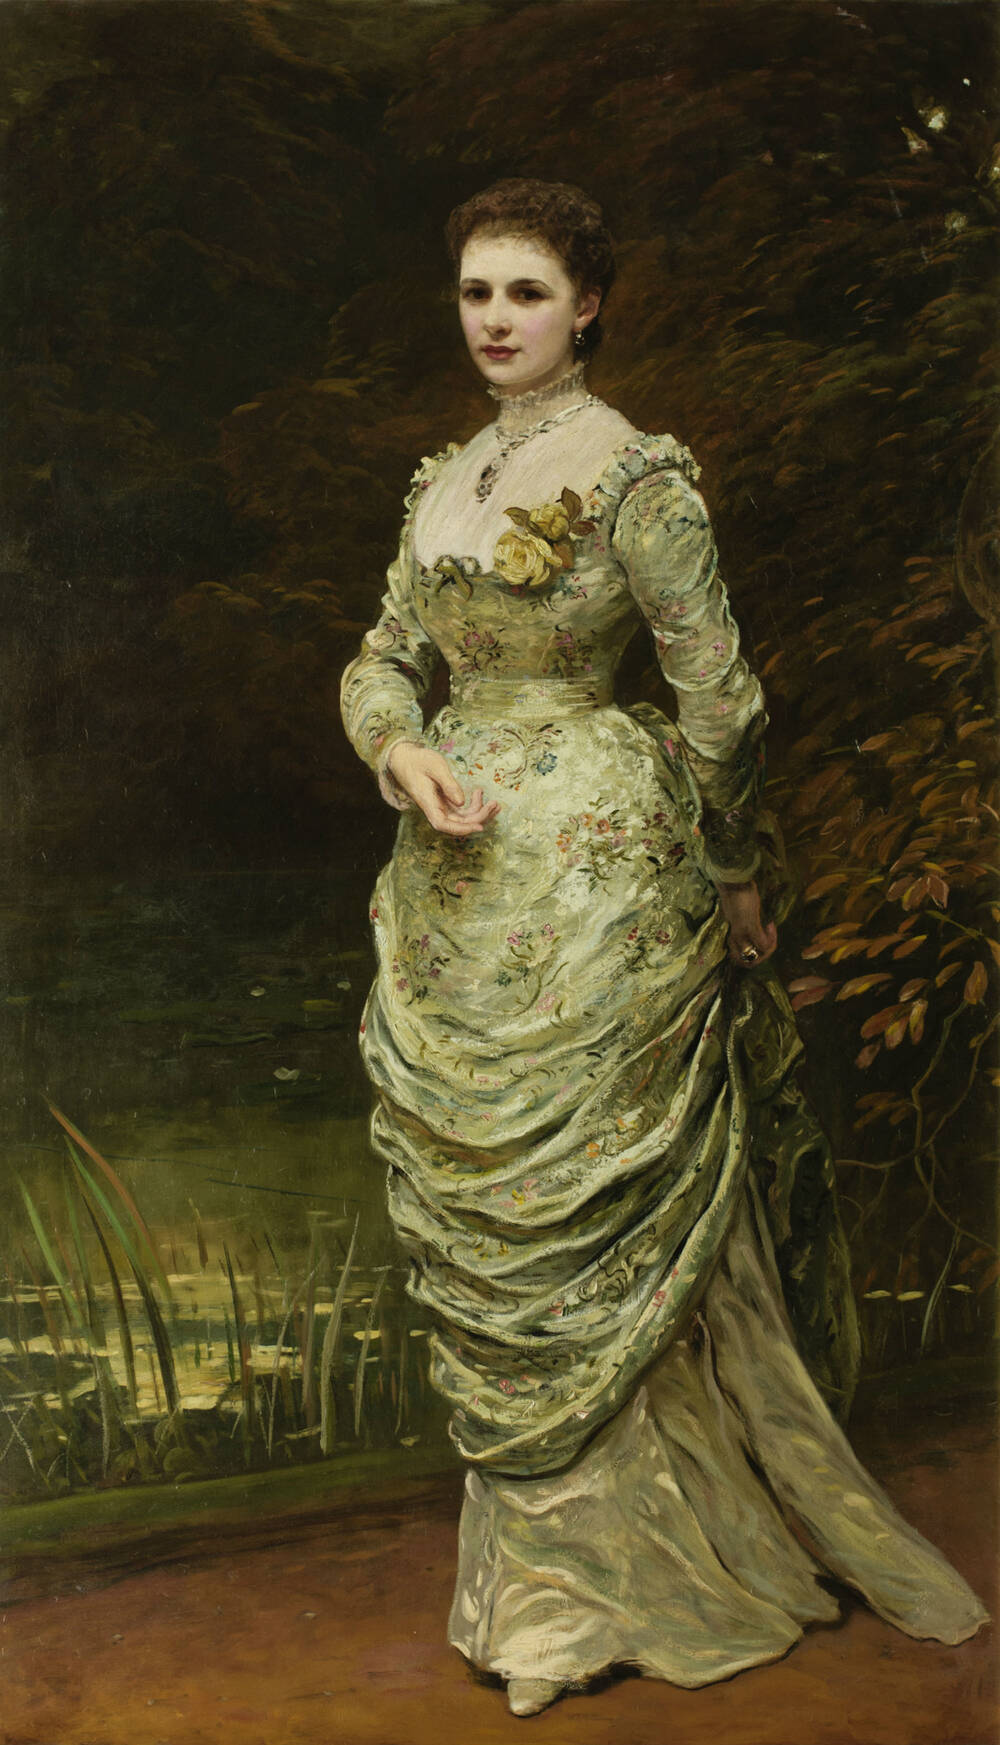 Full-length portrait of a lady in 19th-century dress